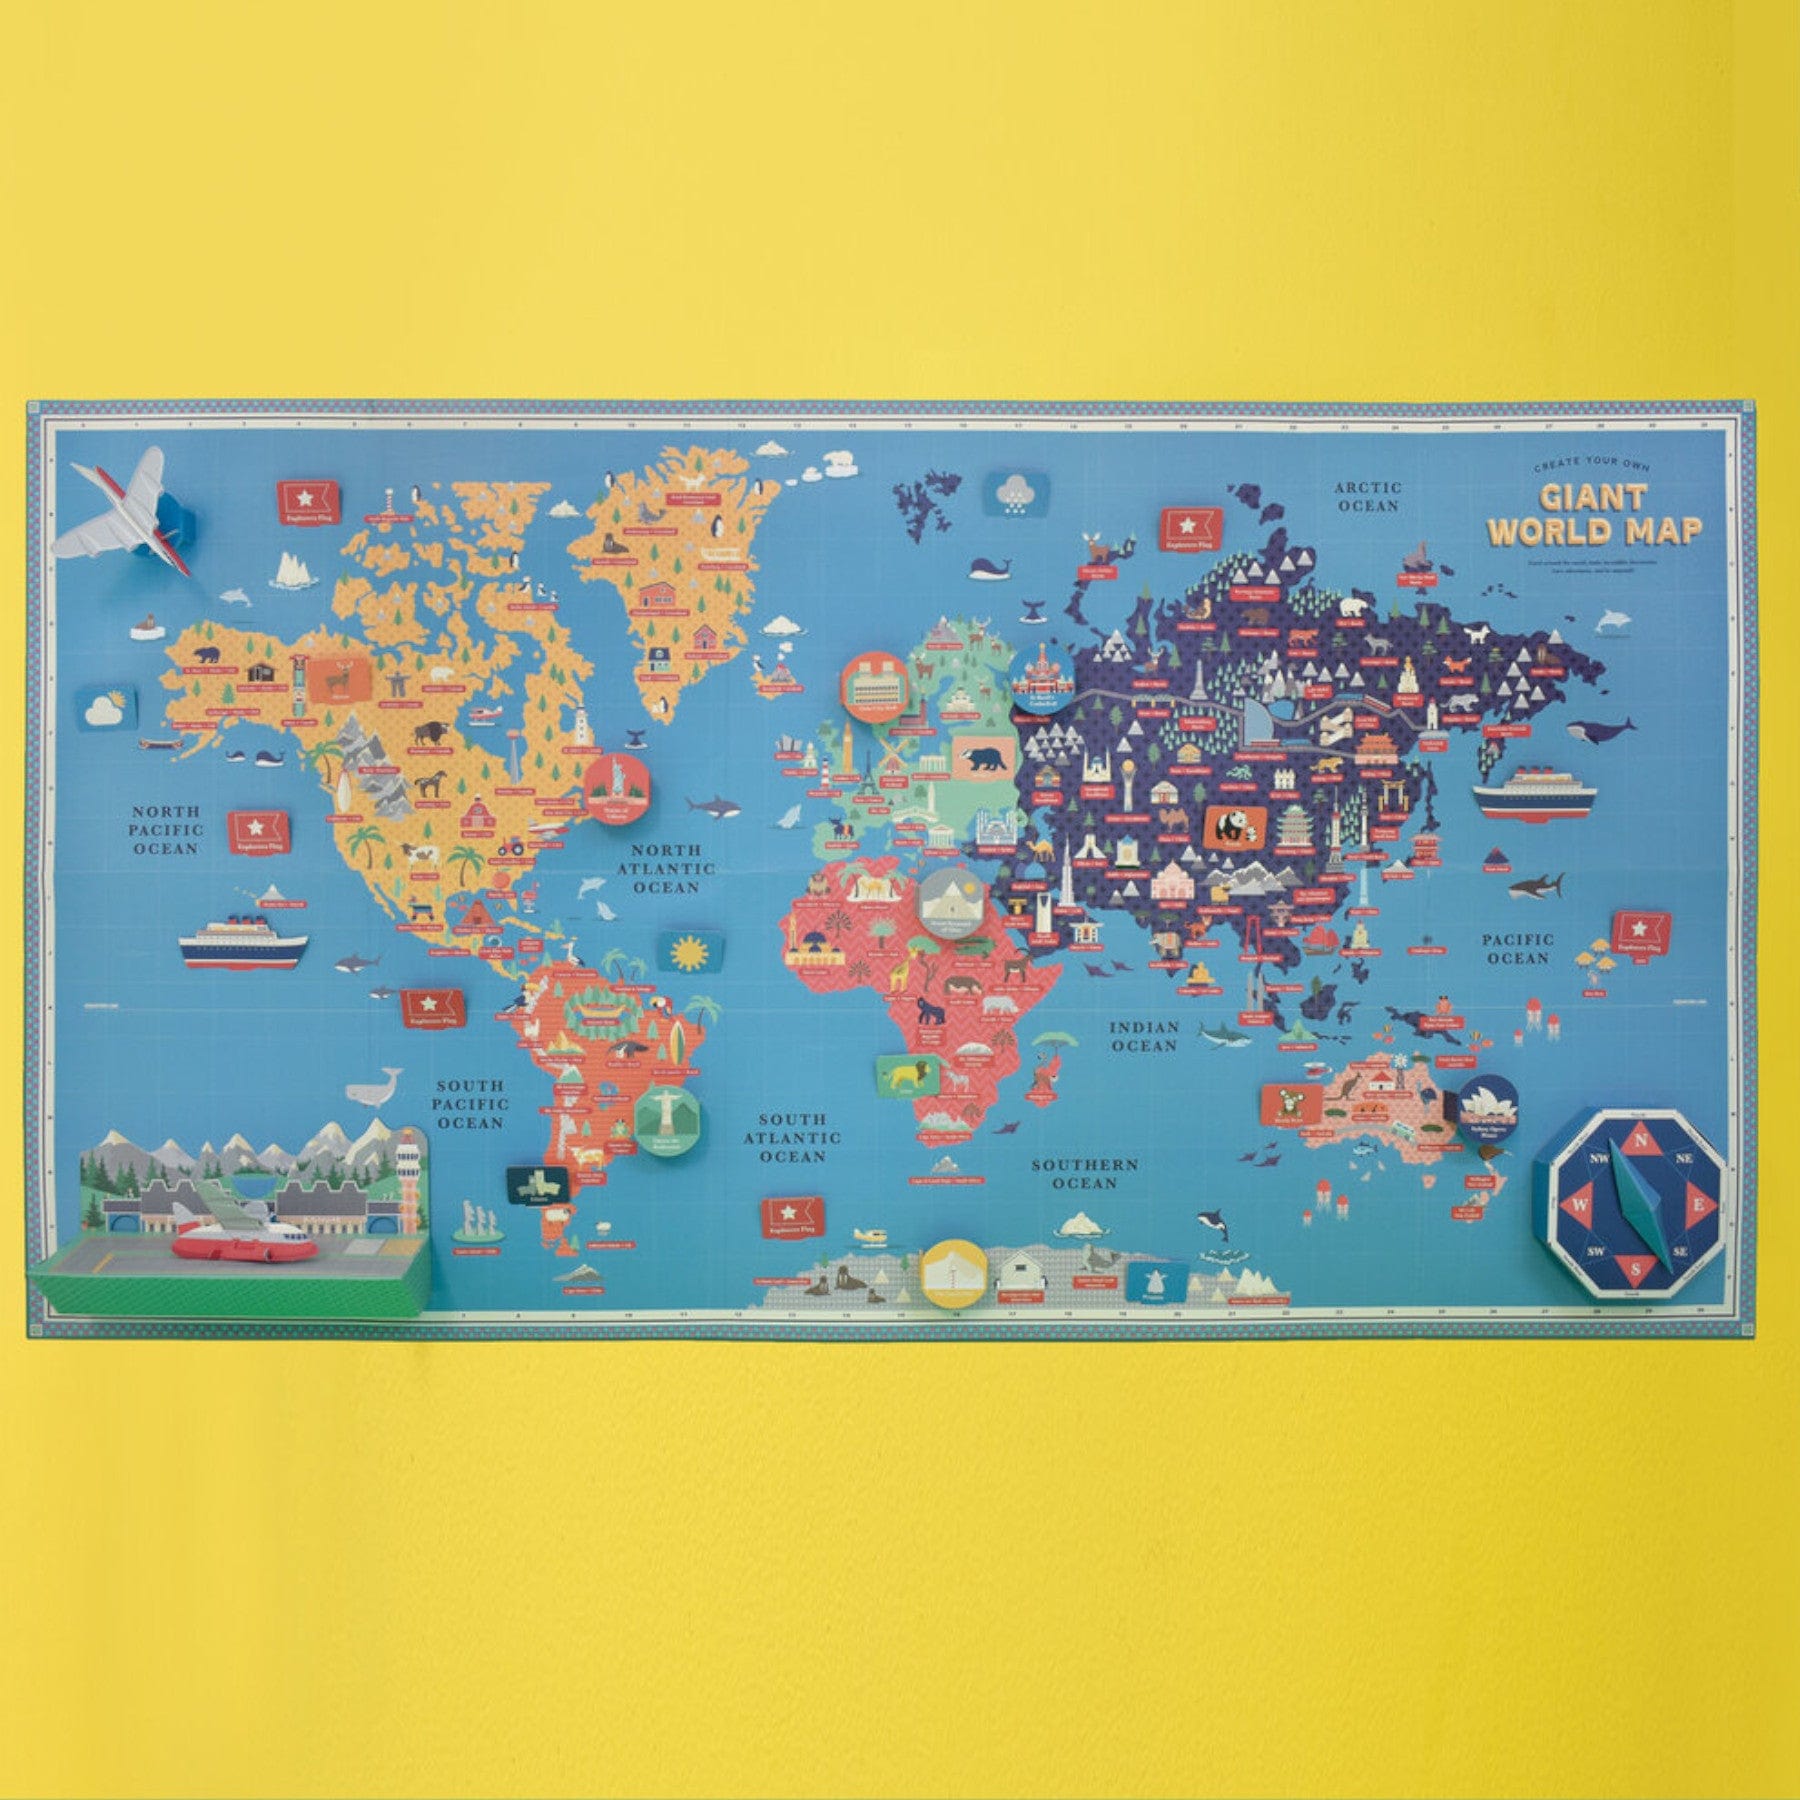 Create your own giant world map